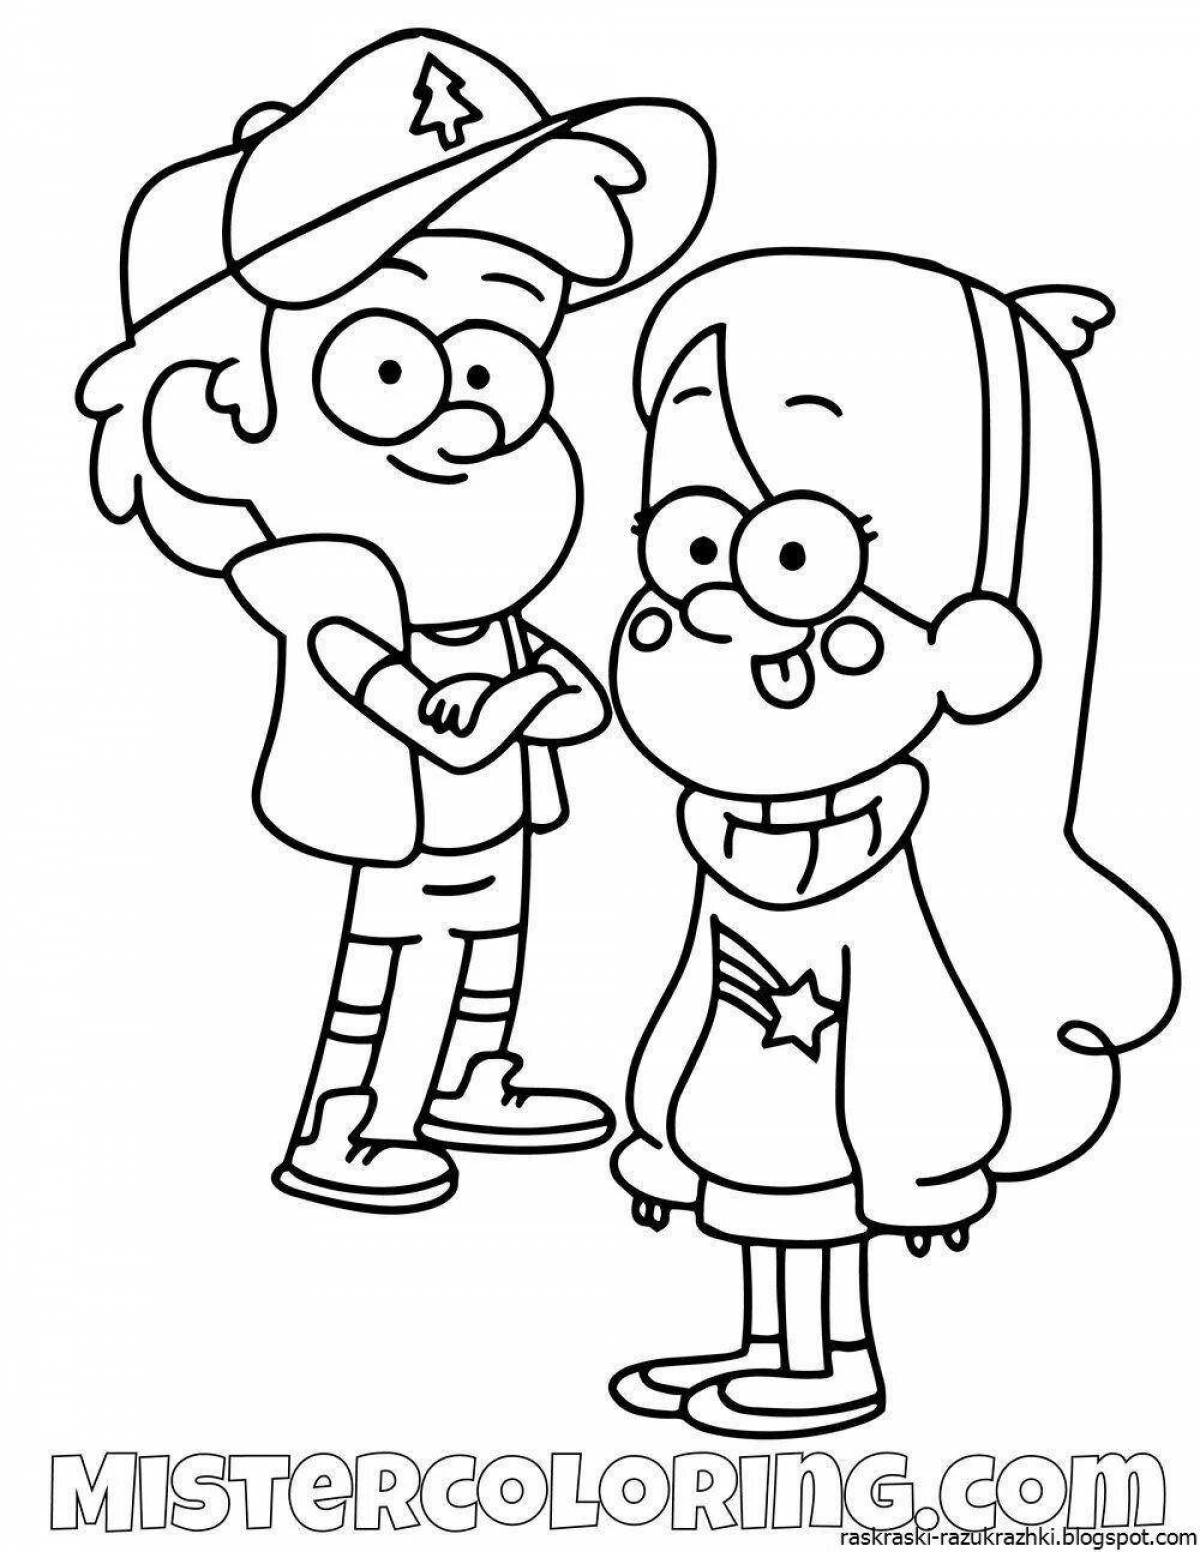 Playful gravity falls coloring page for kids